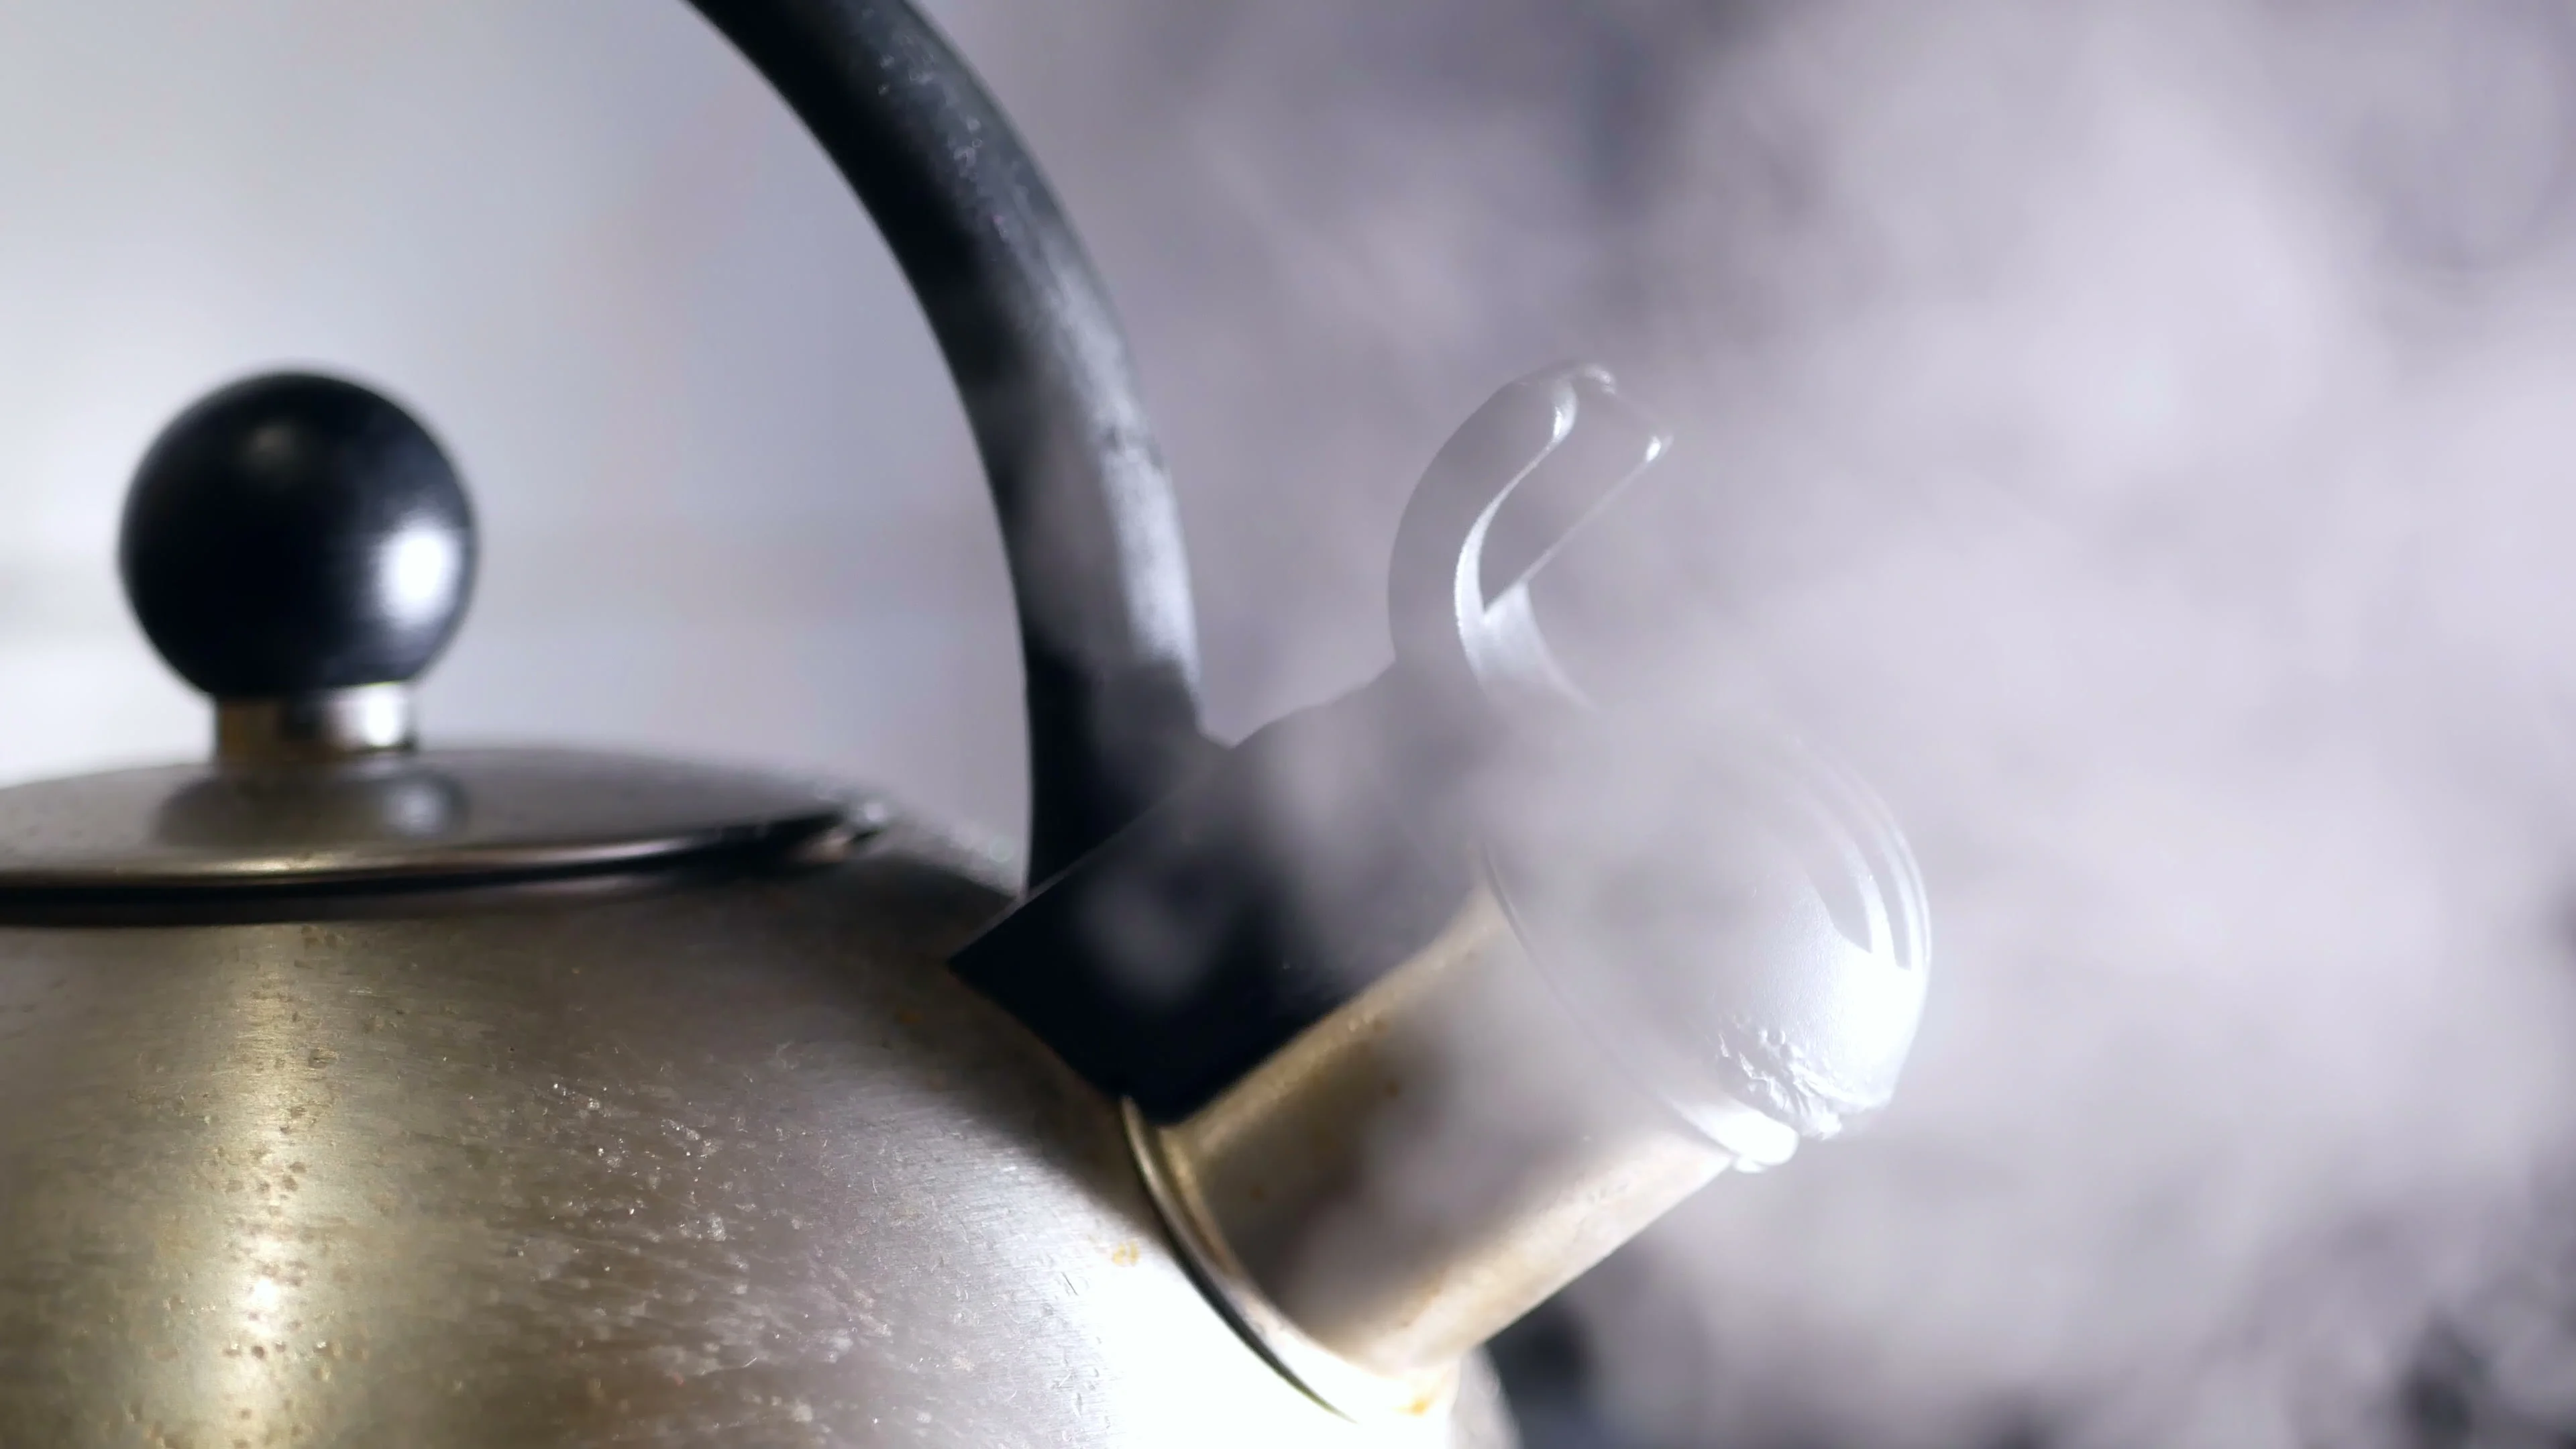 Kettle boiling hot stove, Stock Video